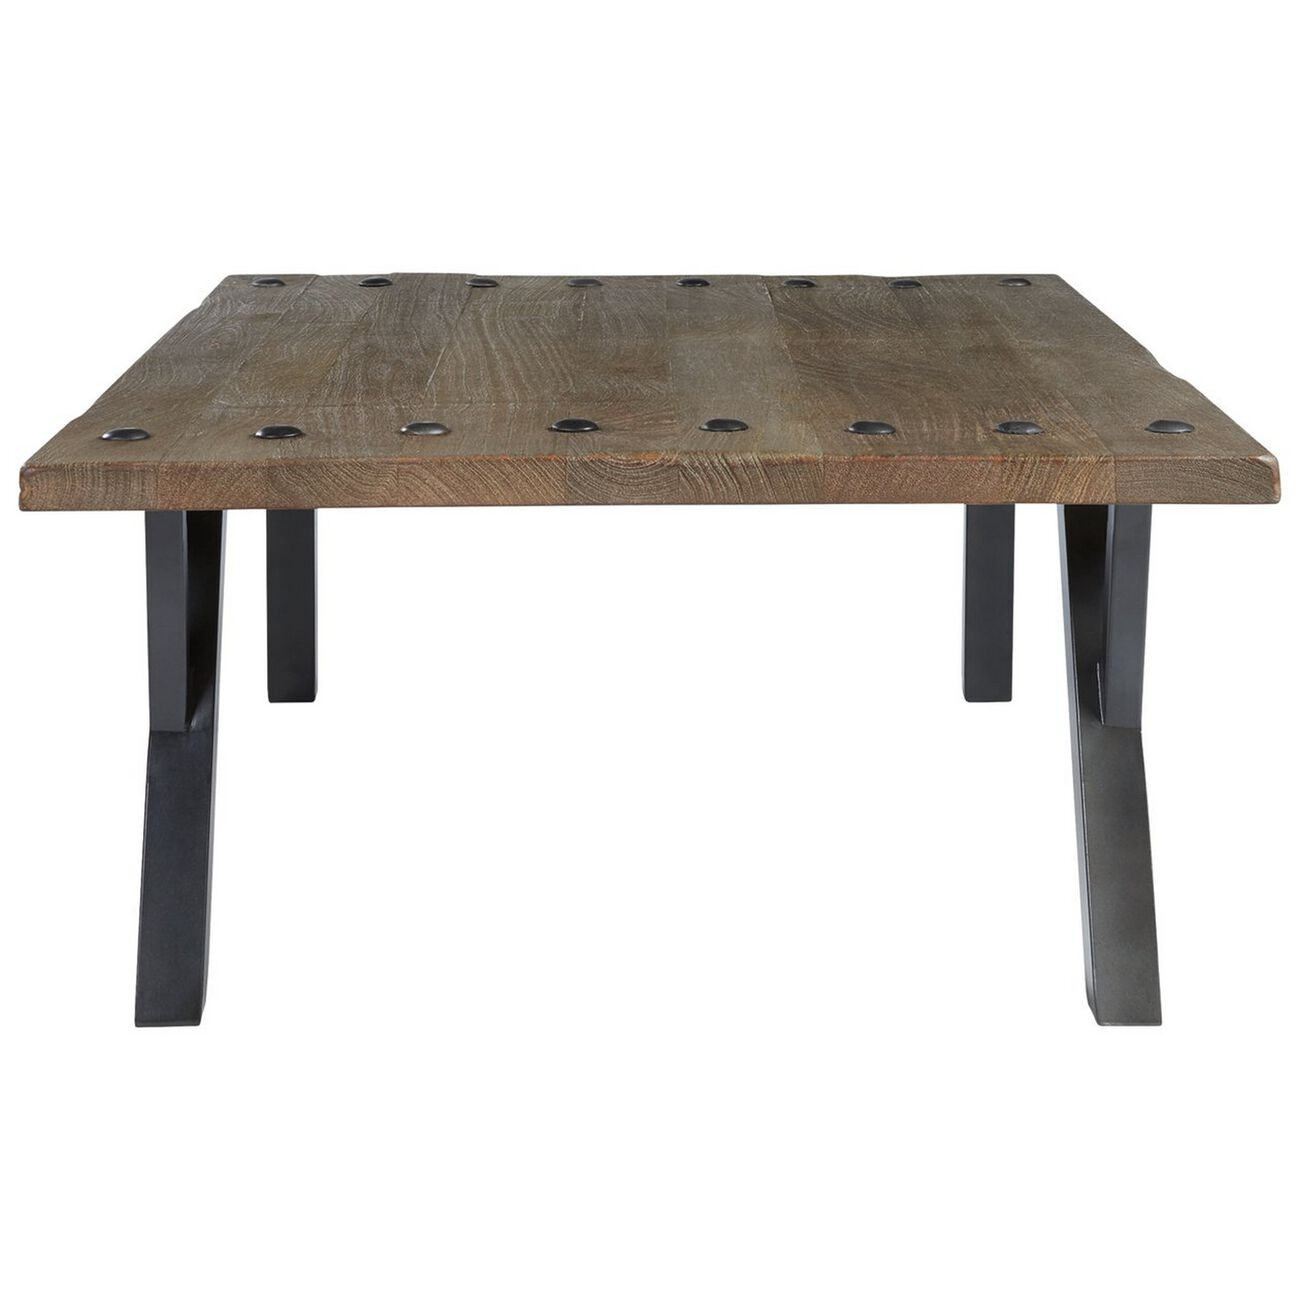 Rectangular Wooden Cocktail Table with Y Shaped Metal Legs, Brown and Black